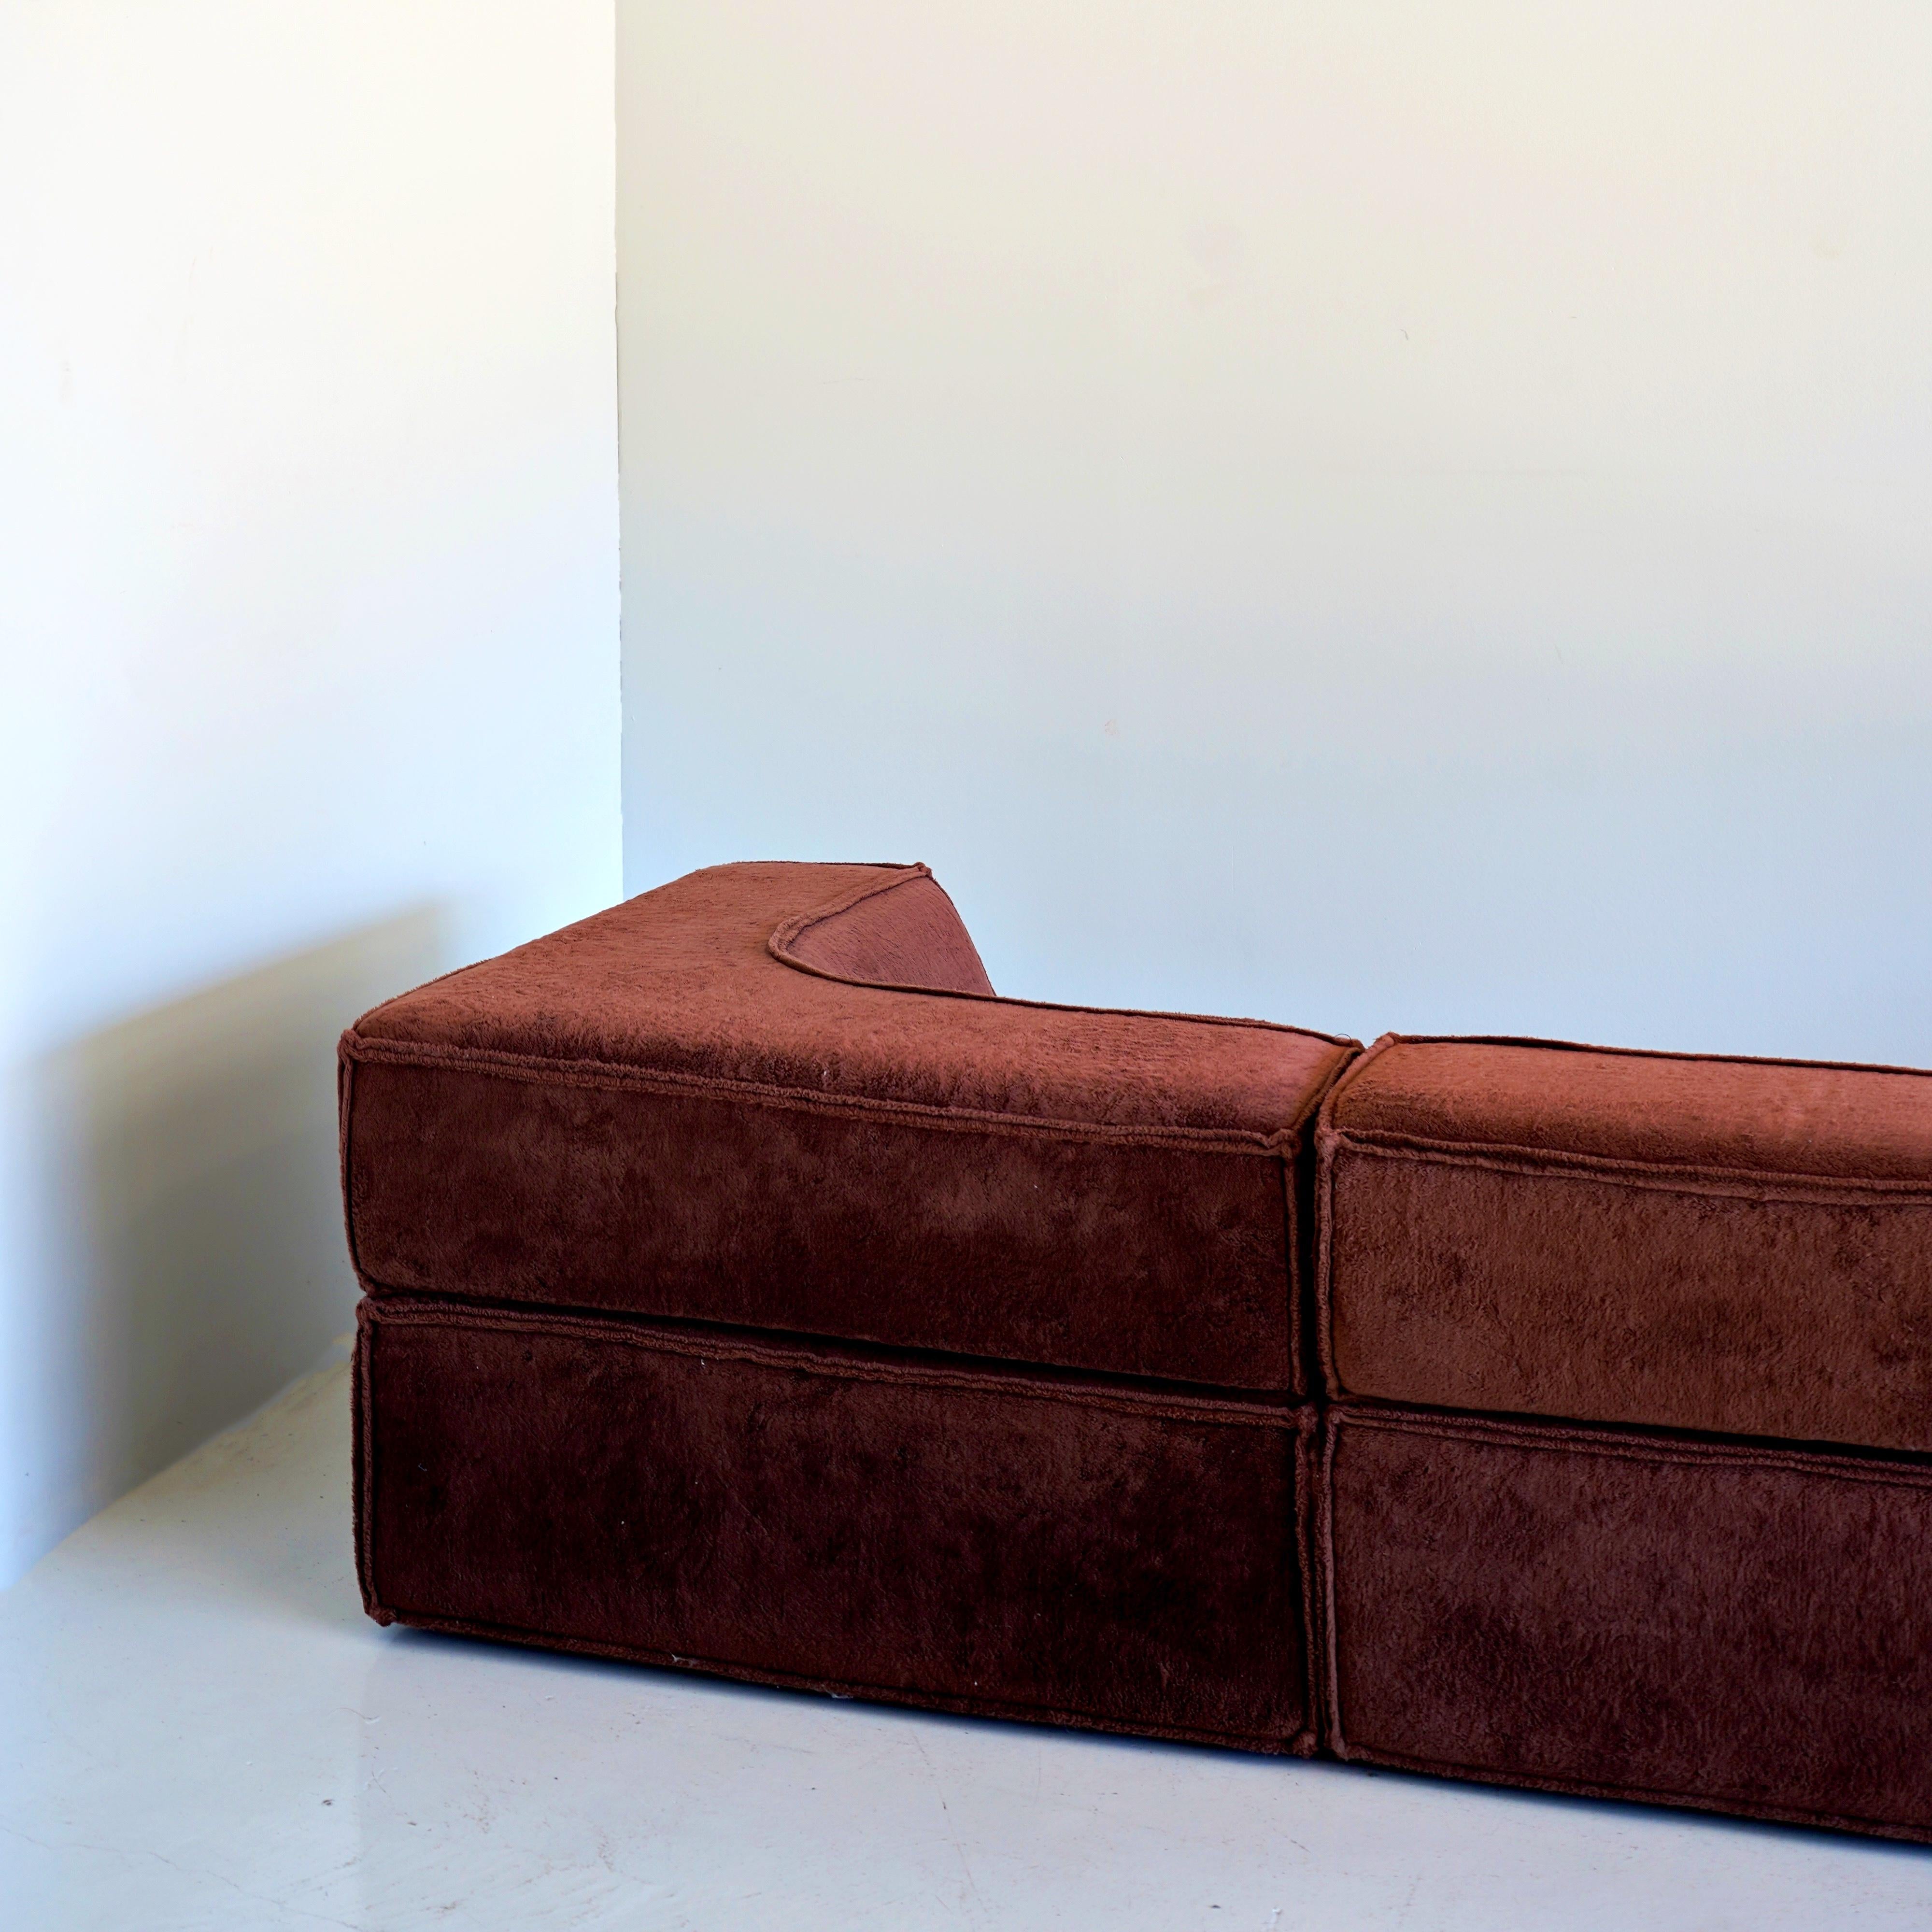 COR Trio Sofa by Team Form AG, 1973 in Original Teddy Fabric In Good Condition For Sale In Las Vegas, NV